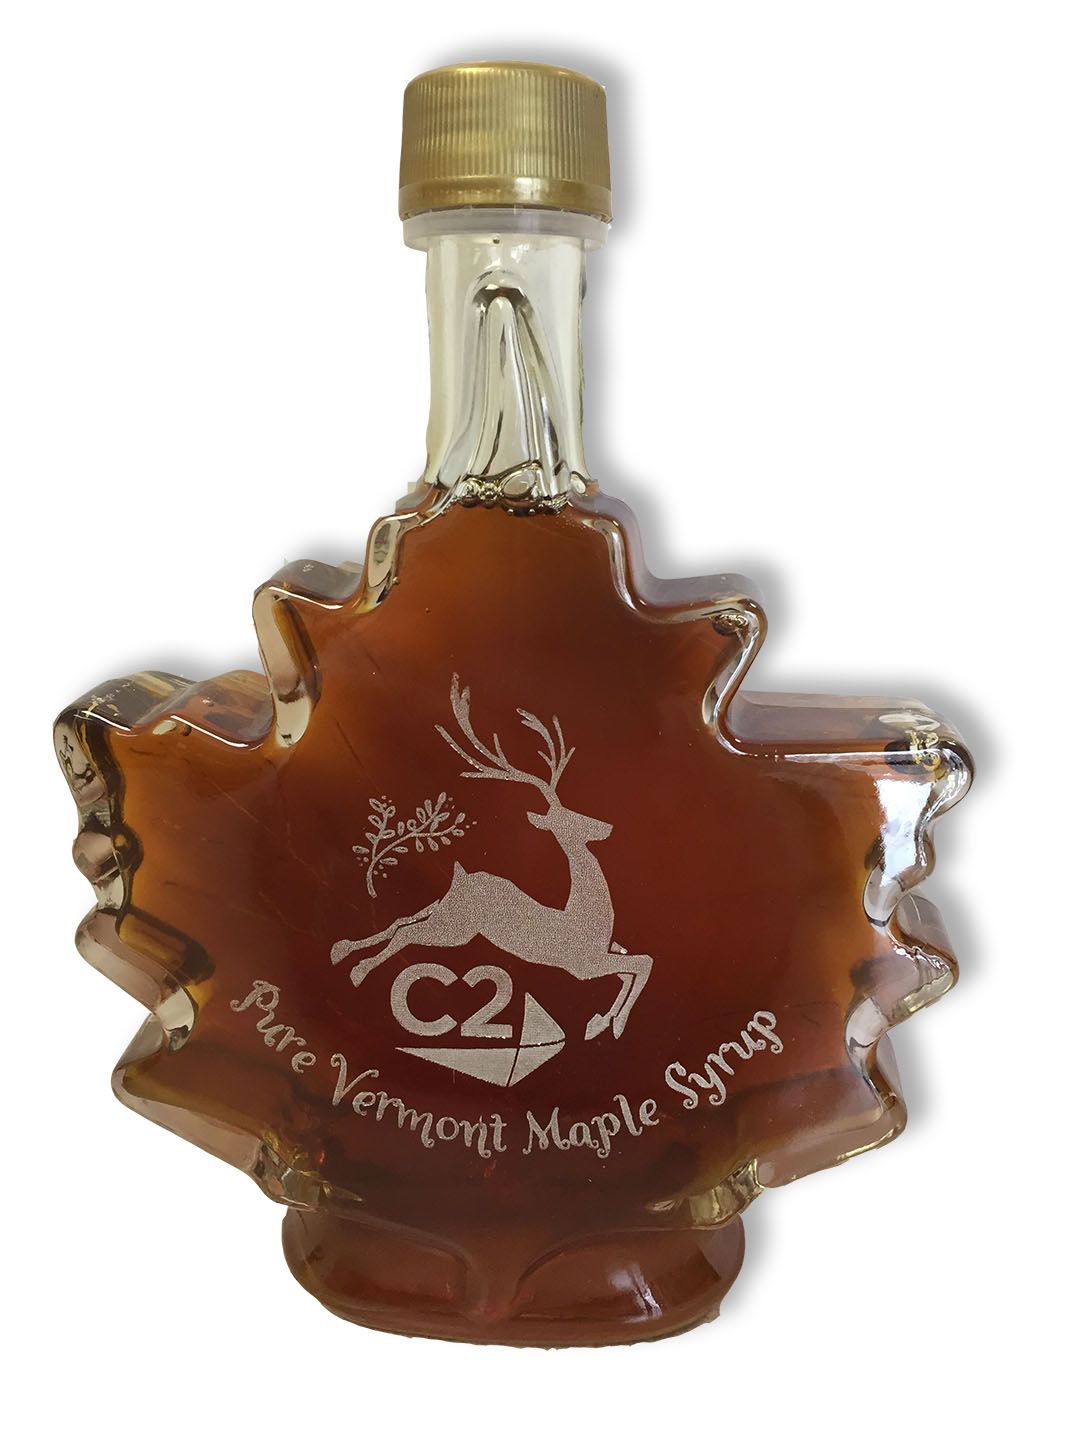 Branded Maple Syrups